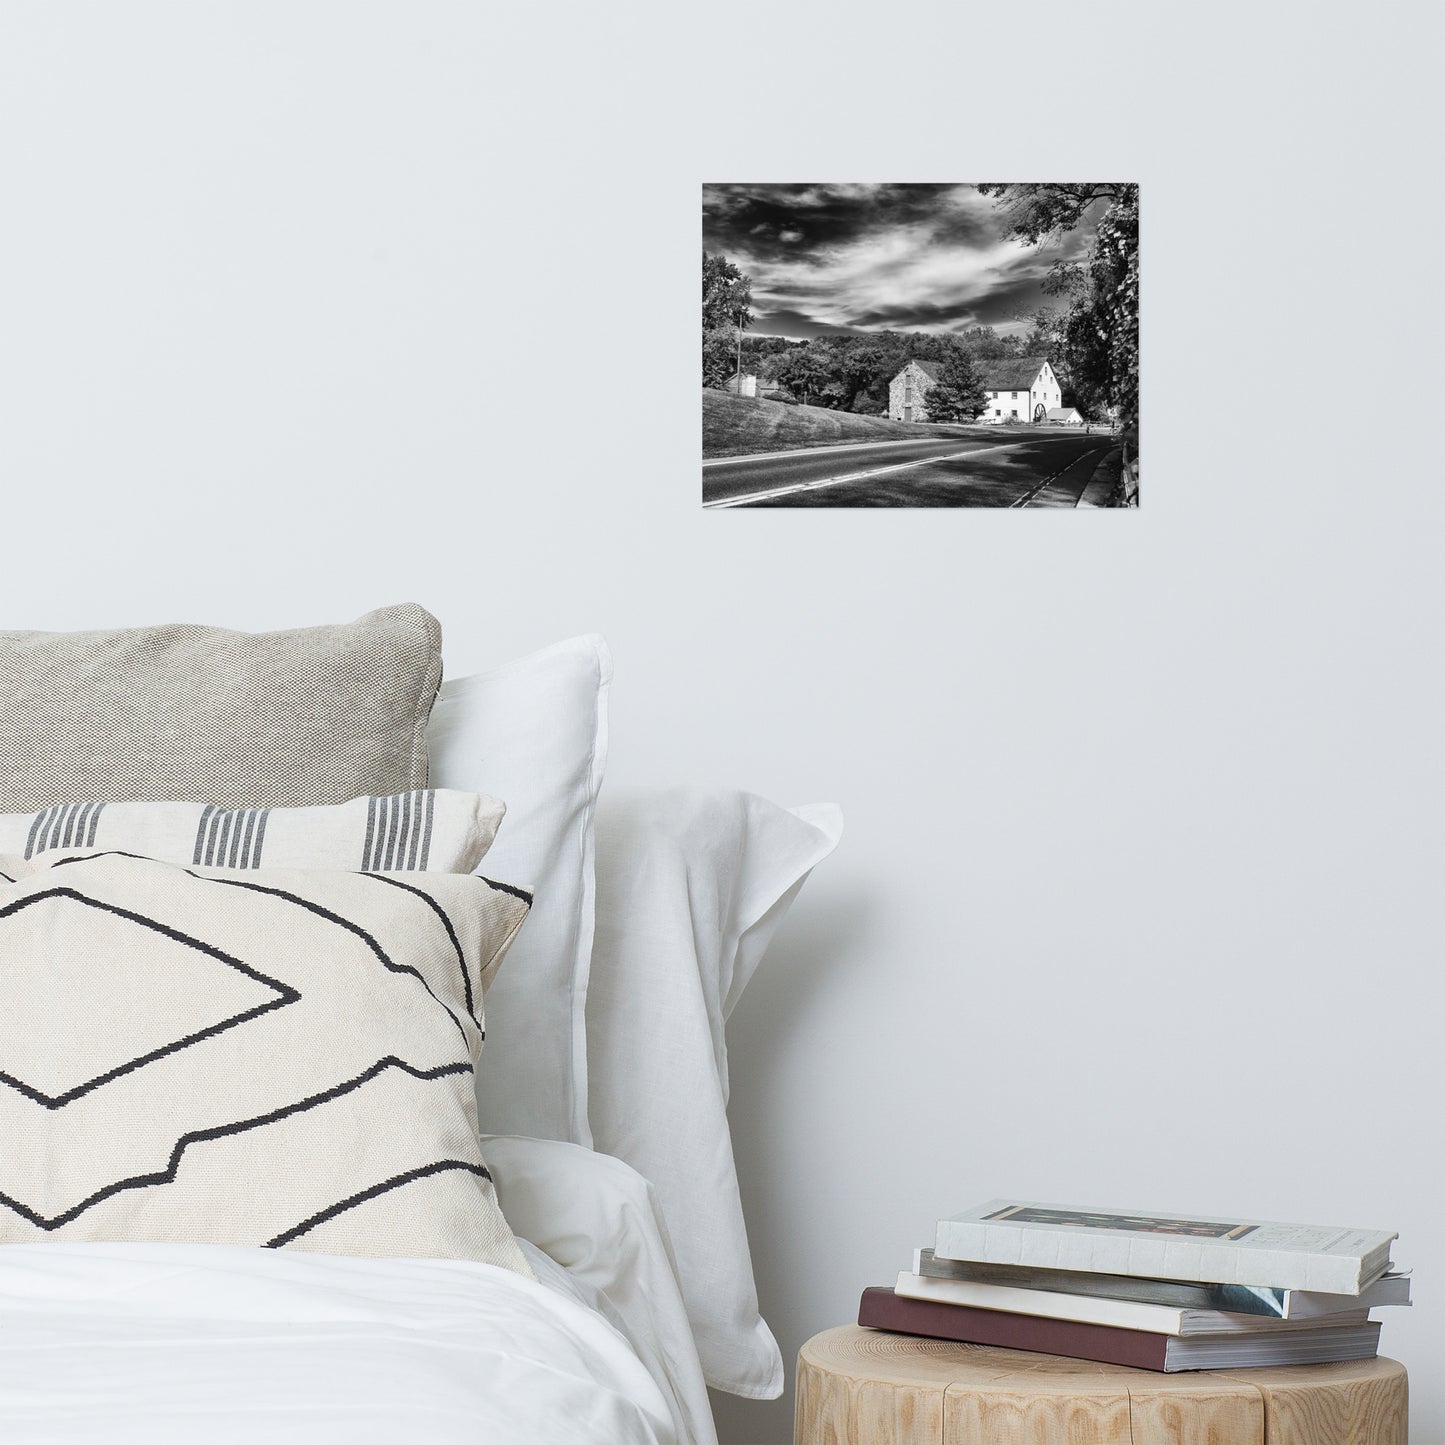 Greenbank Mill - Summer Black and White Landscape Photo Loose Wall Art Prints